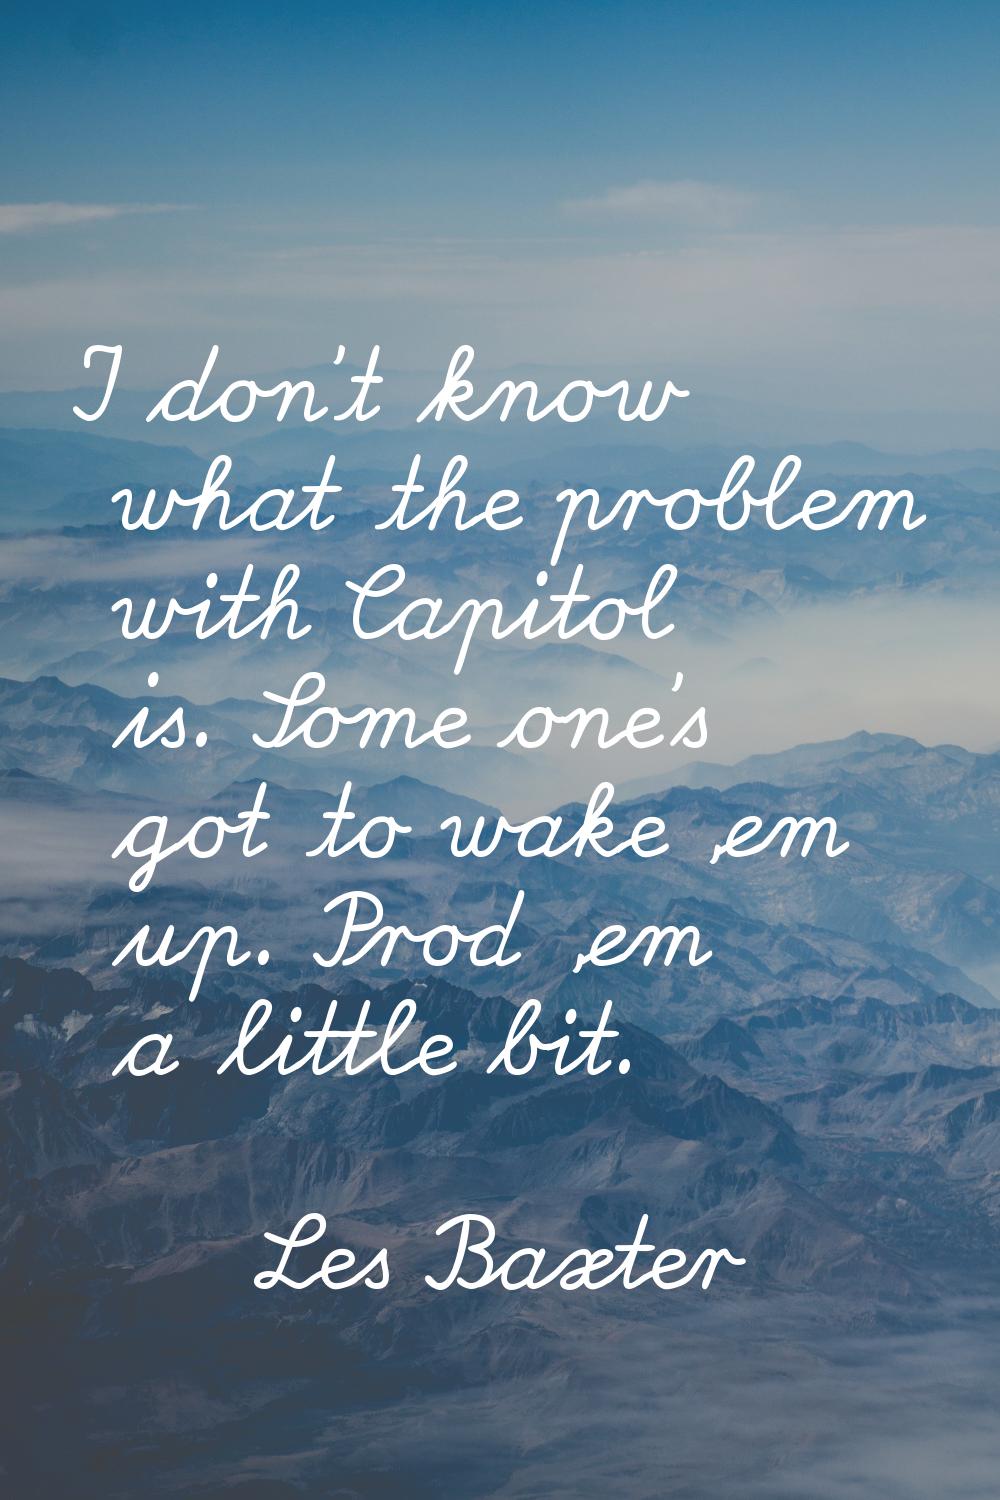 I don't know what the problem with Capitol is. Some one's got to wake 'em up. Prod 'em a little bit